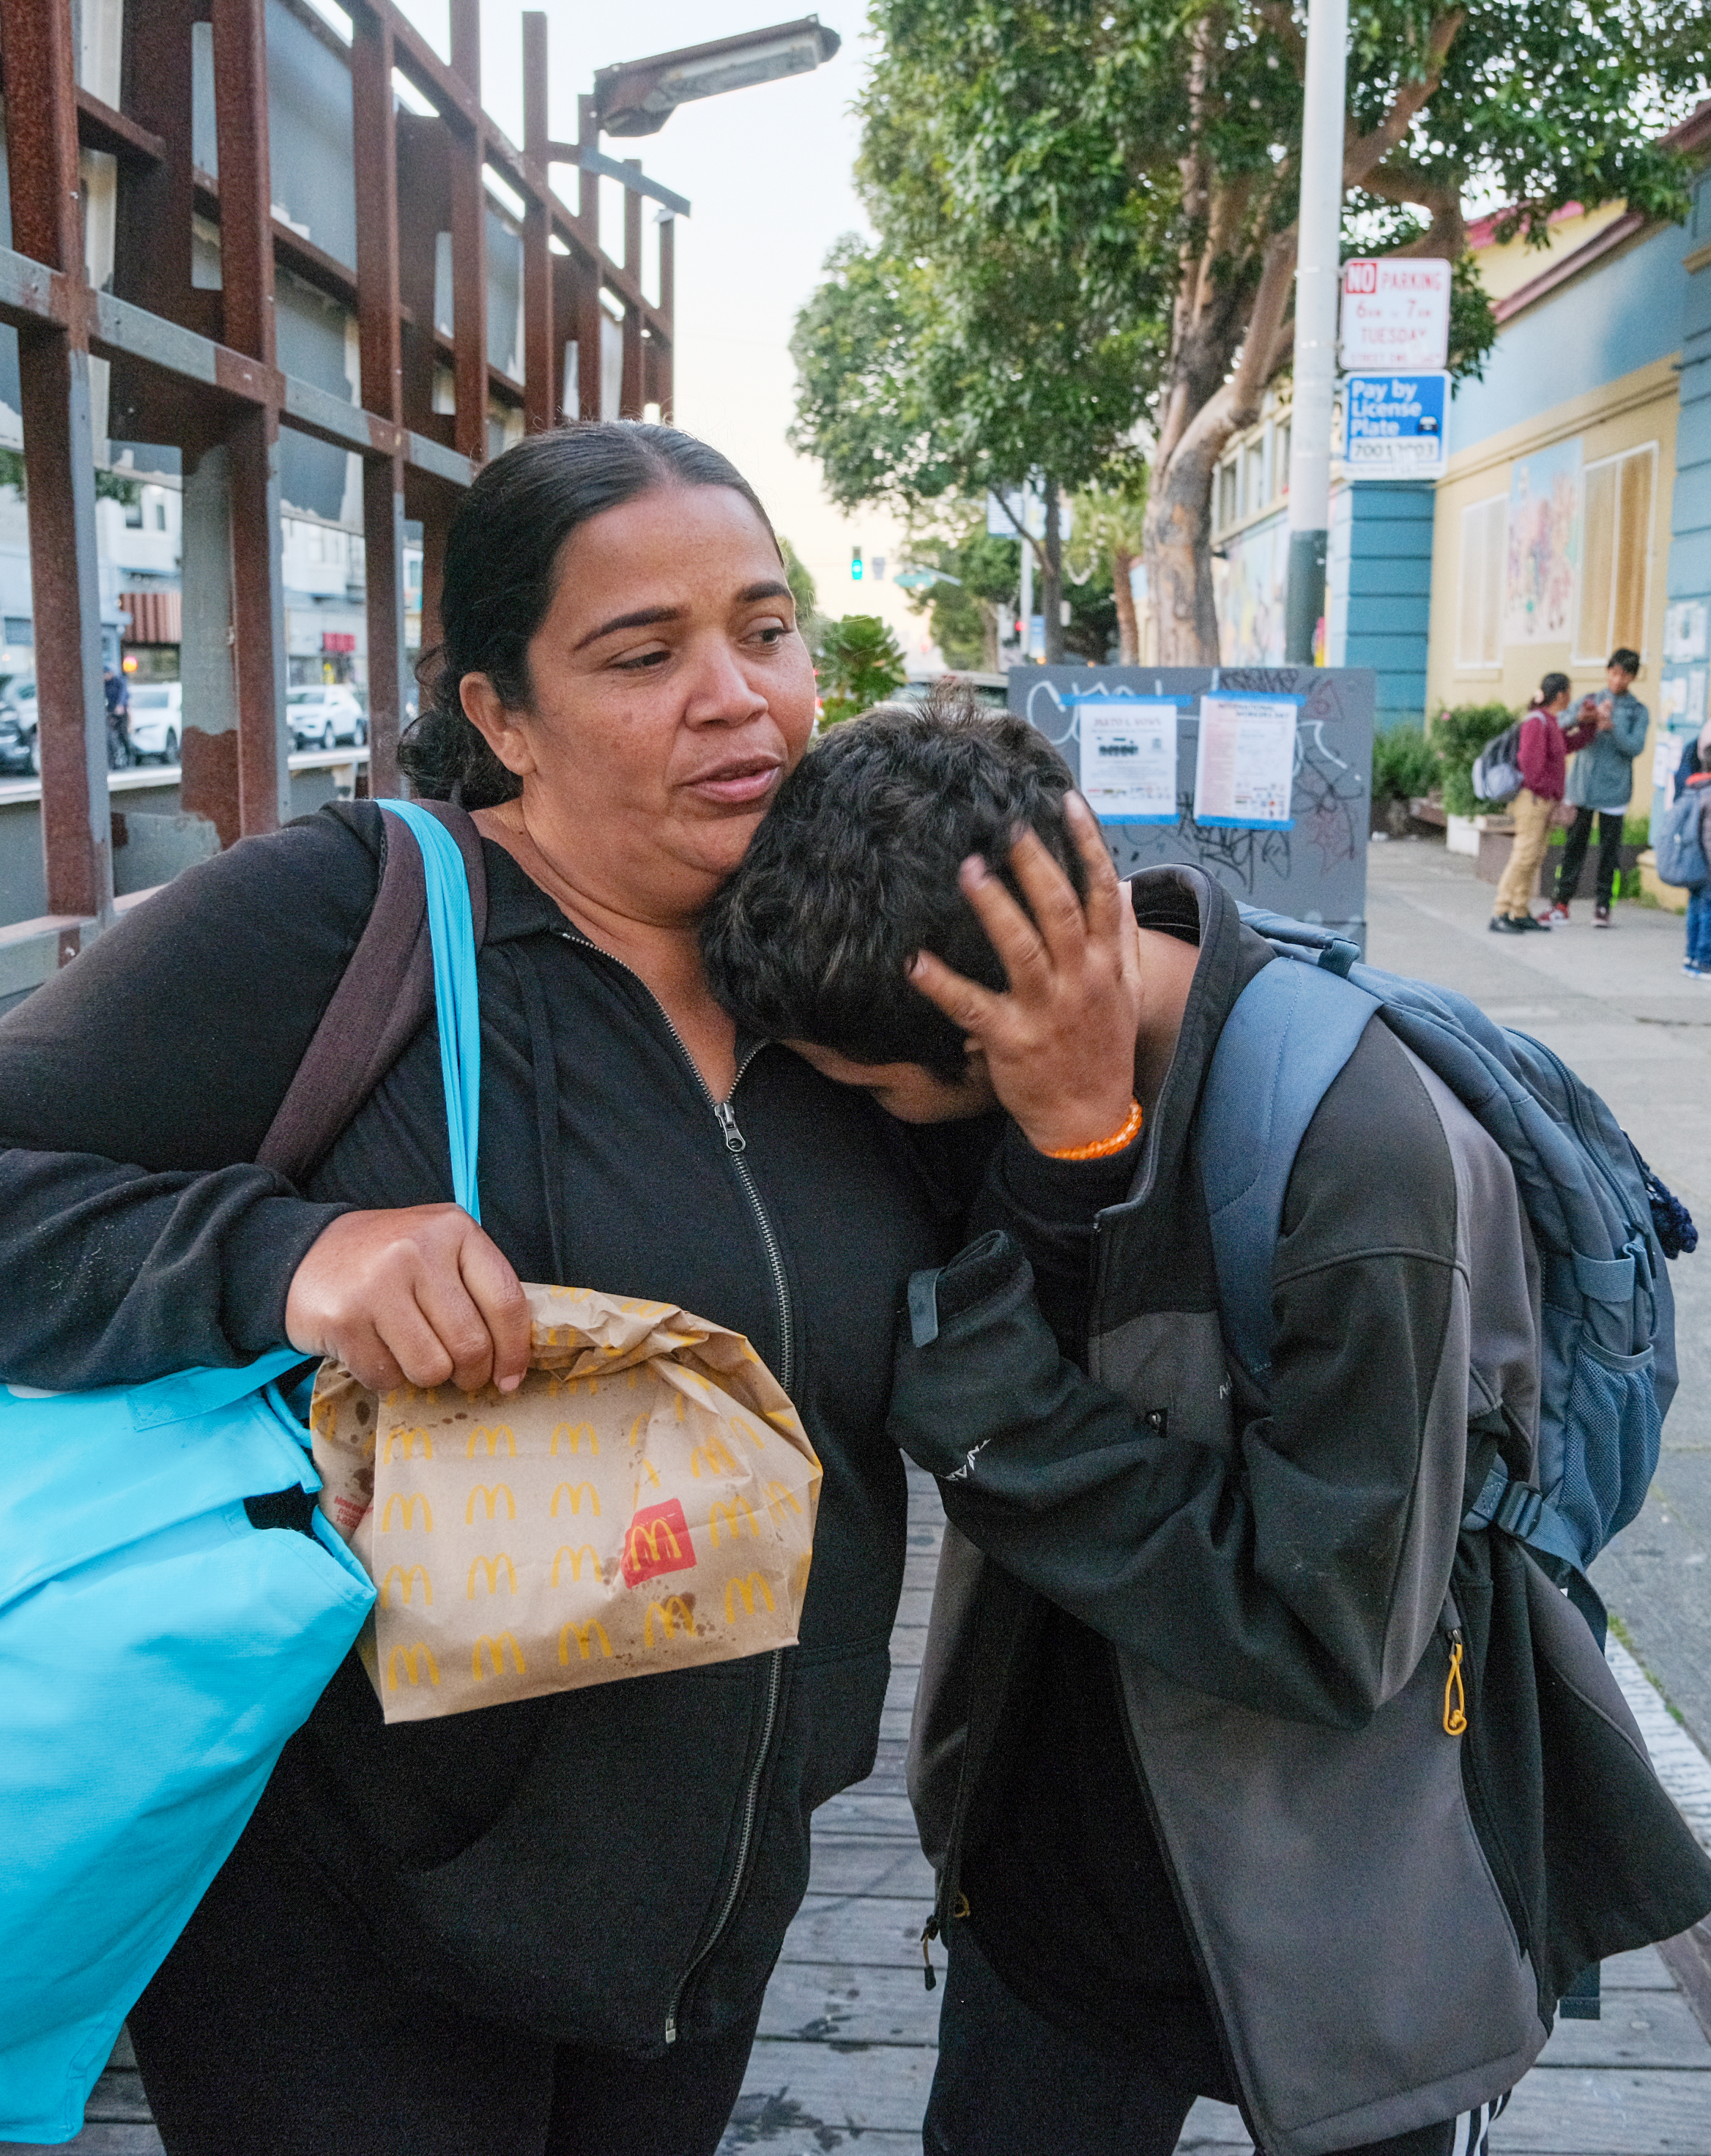 A woman holding a McDonald's bag embraces a distressed child on a city sidewalk.